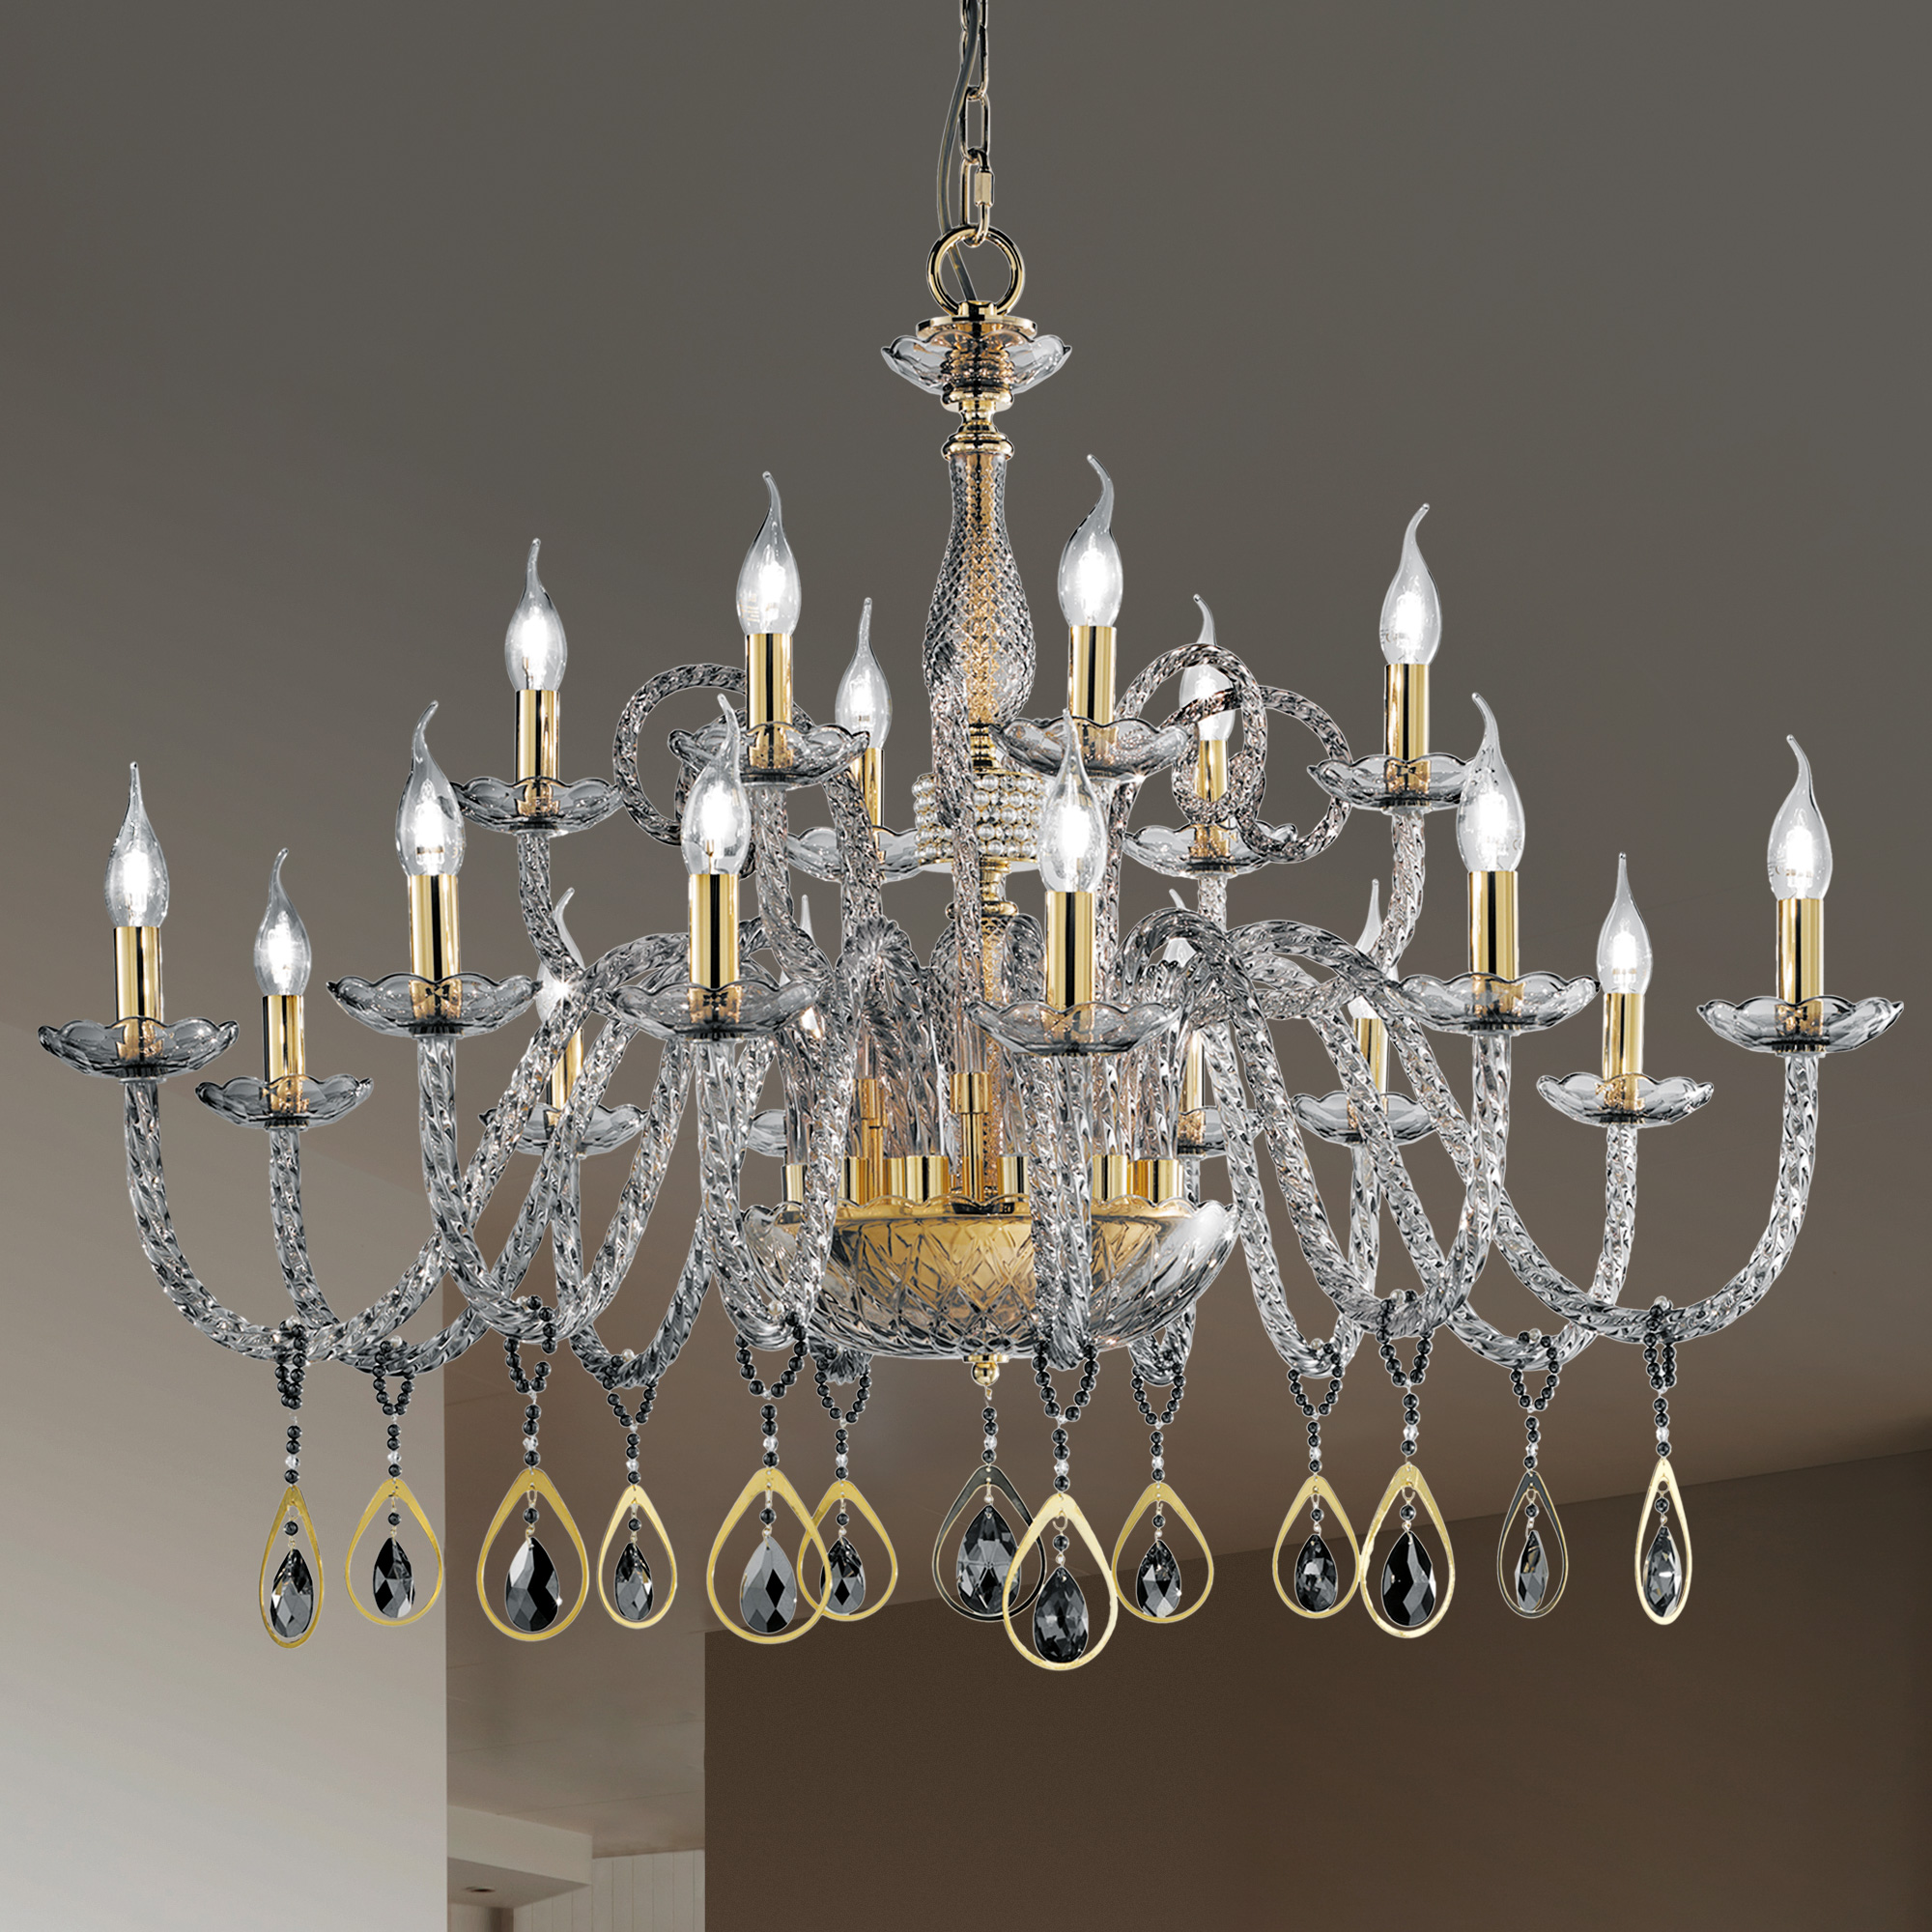 Large Glass Chandelier With Swarovski® Crystals And Pearls